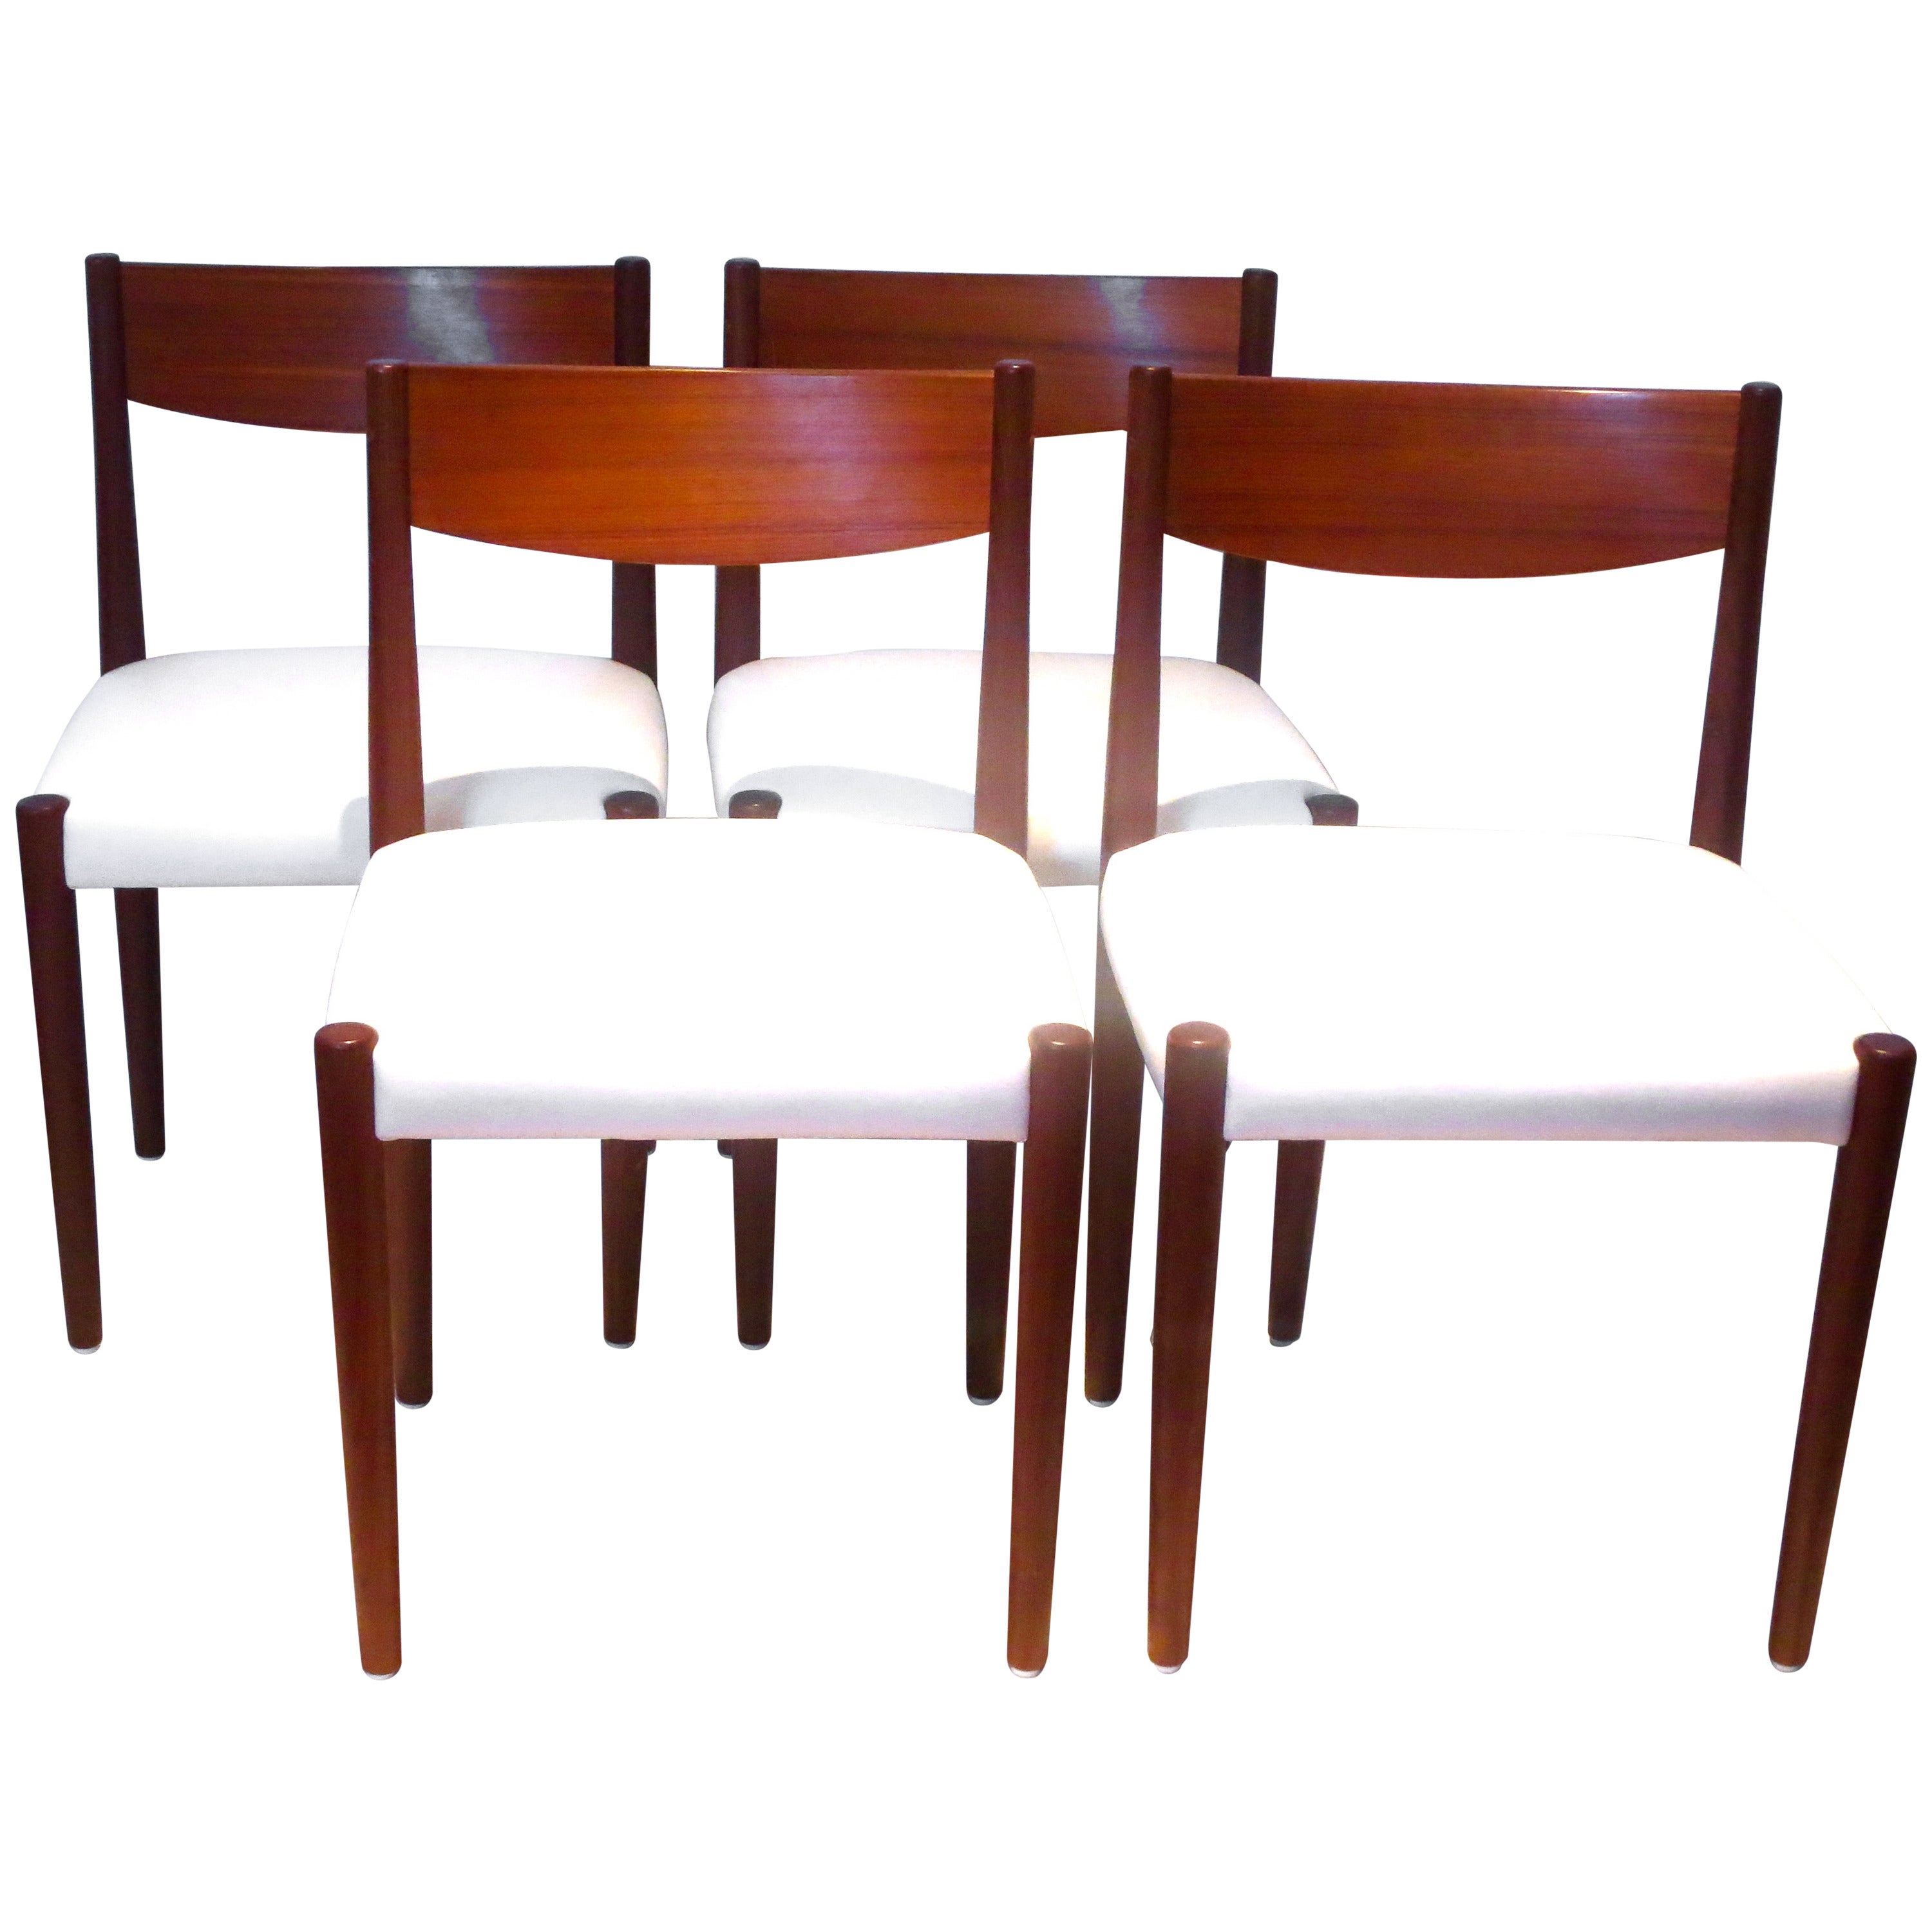 Nice set of 4 Dining chairs design by Poul Volther for Frem Rojle in teak